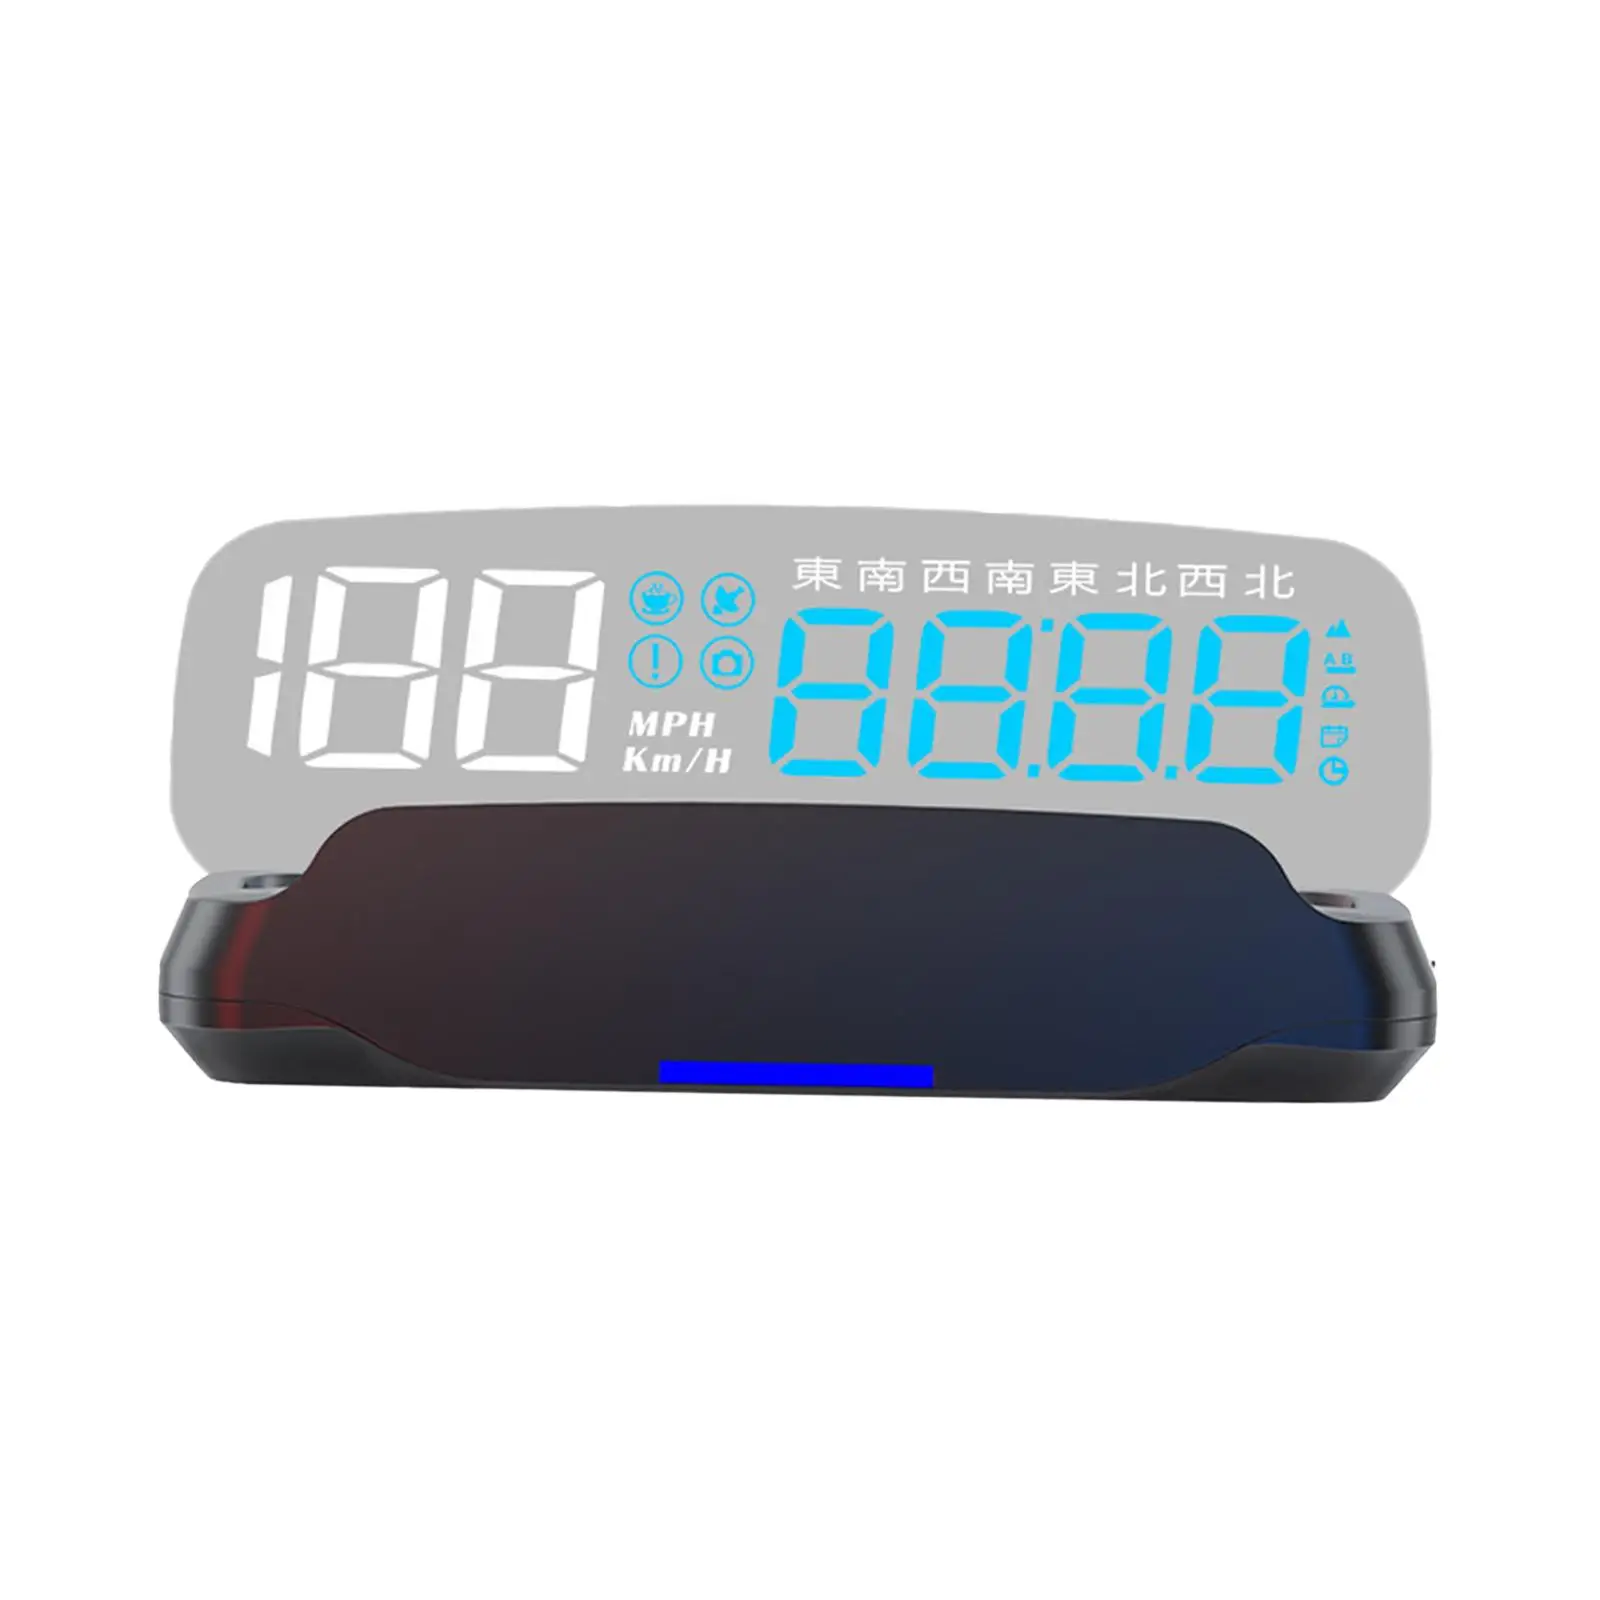 Car HUD C7 Compass Sturdy LED Display Speedometer Multifunction Professional for Automobile Trucks Outside Attachments